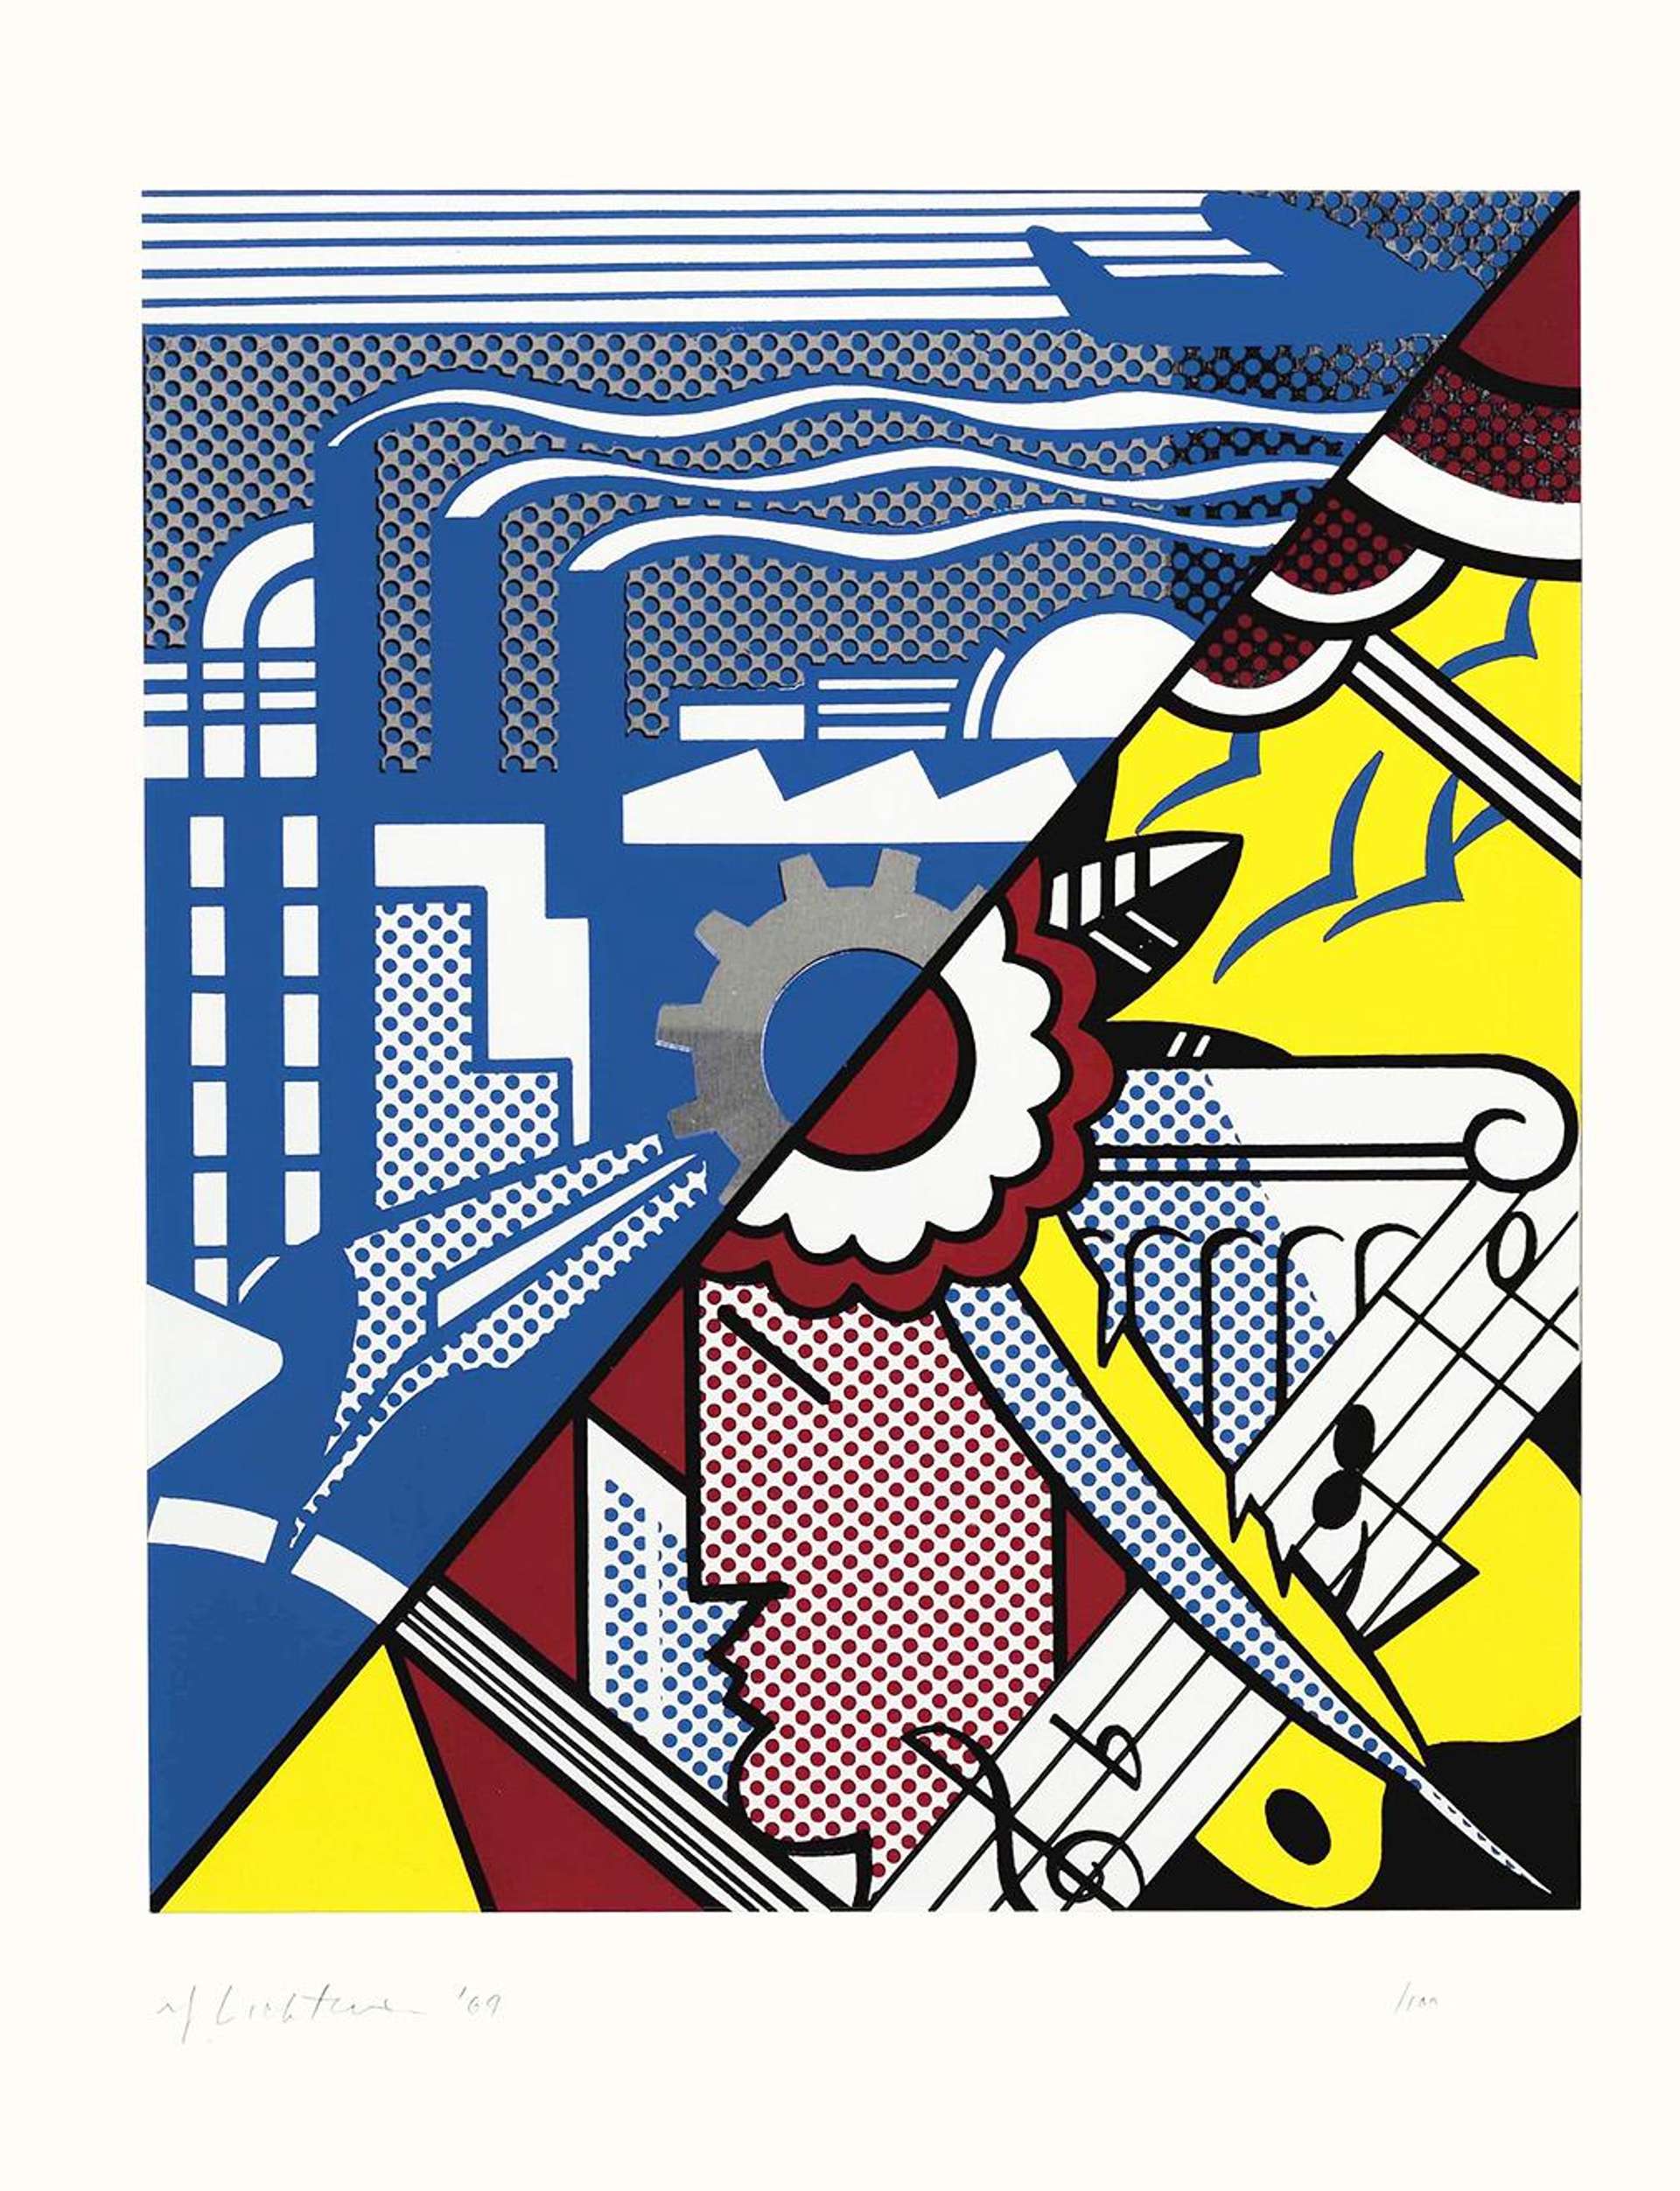 A screenprint demonstrating two scenes divided along the axis of the composition, depicting industry and the arts in a contrasting palette of blue and red with yellow/